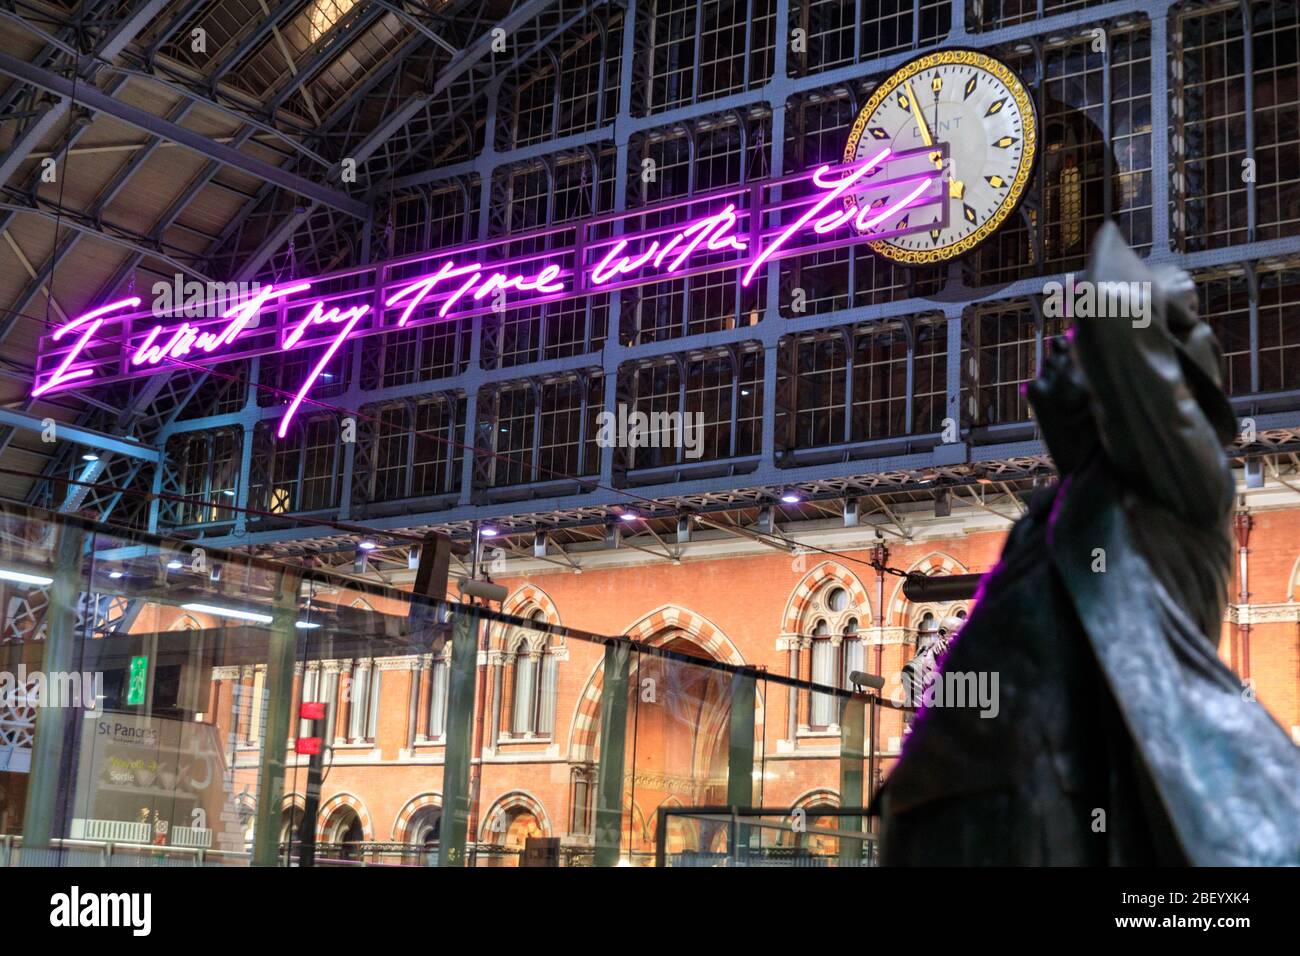 Statue of John Betjeman by Martin Jennings looks up to 'I Want My Time With You' neon art light installation by Tracy Enim St. Pancras Station, London Stock Photo